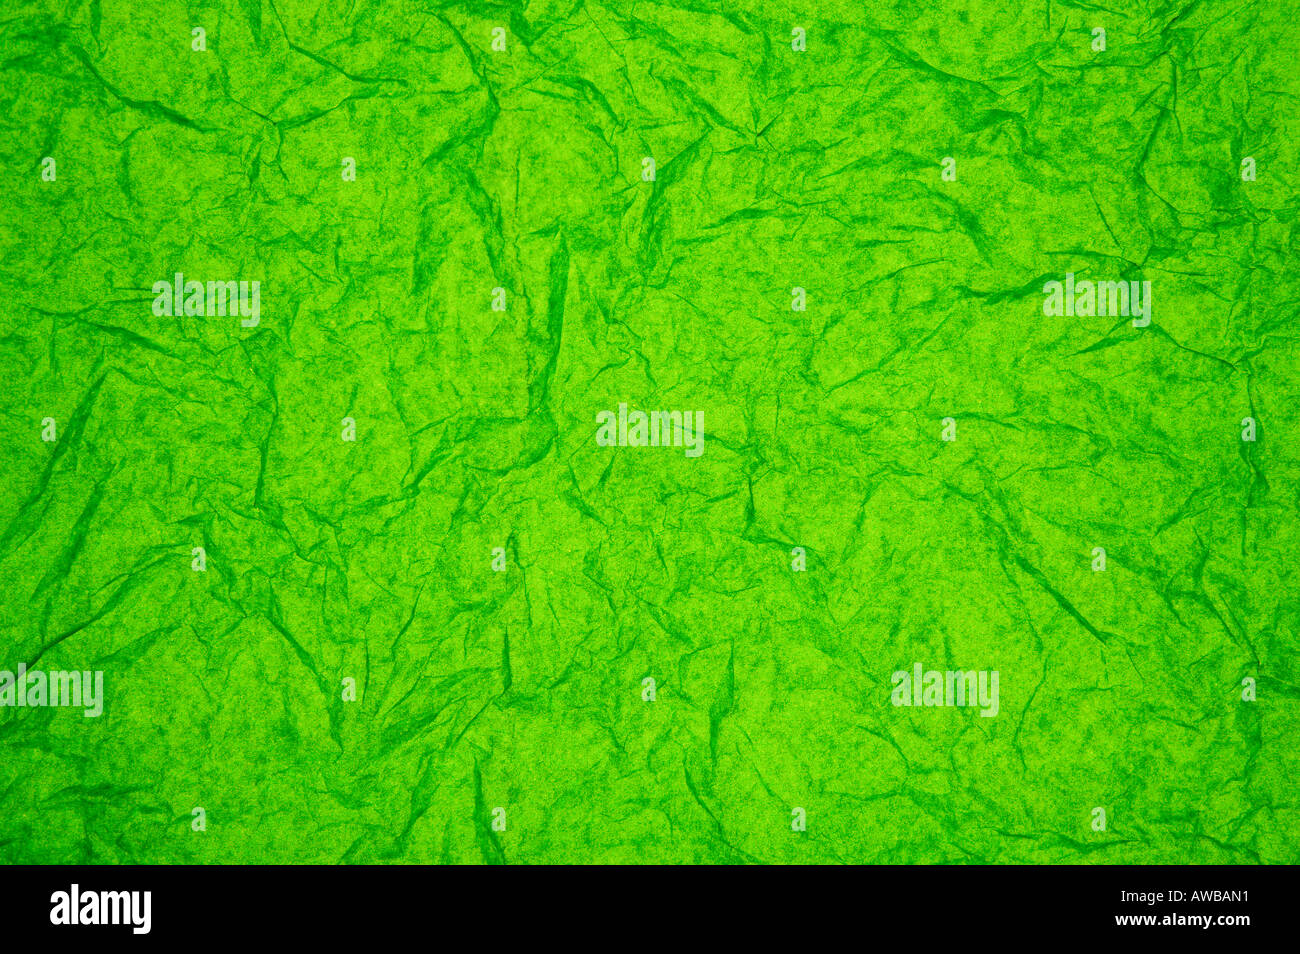 ABSTRACT RANDOM BACKGROUND OF CREASED CRUMPLED BRIGHT GRASS GREEN TISSUE PAPER Stock Photo